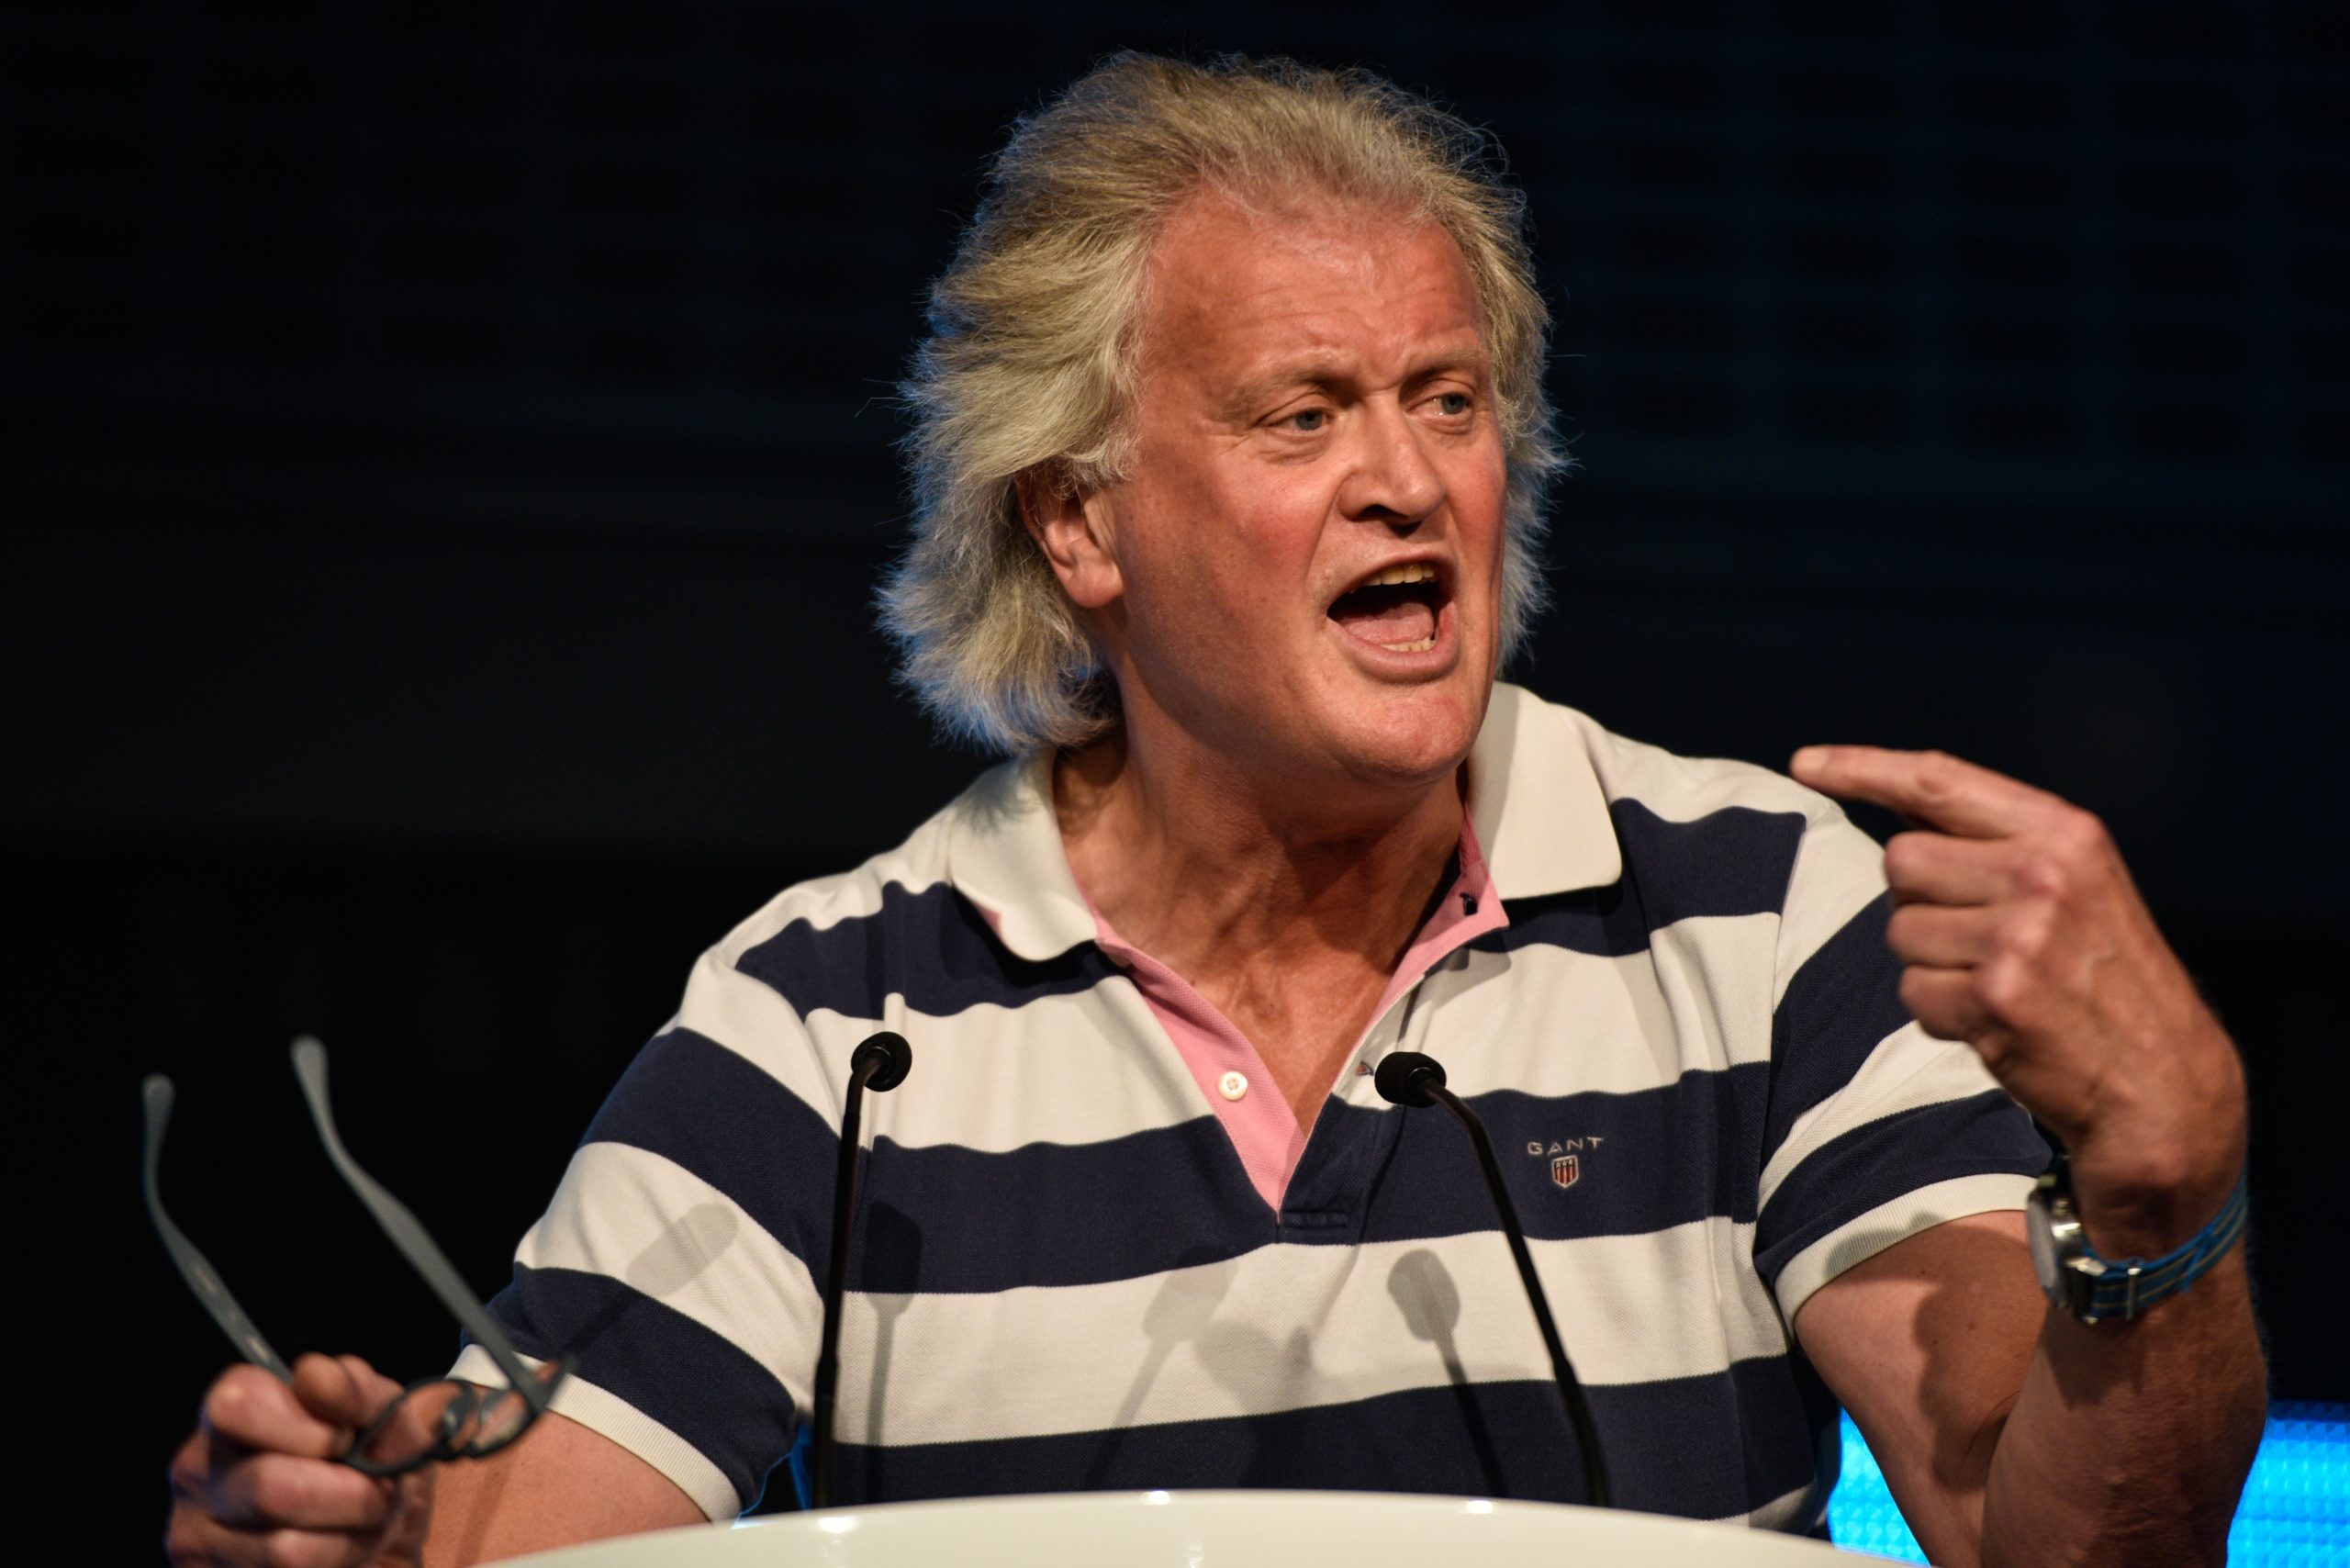 Wetherspoons has reported a record loss and people don’t have much sympathy for Tim Martin